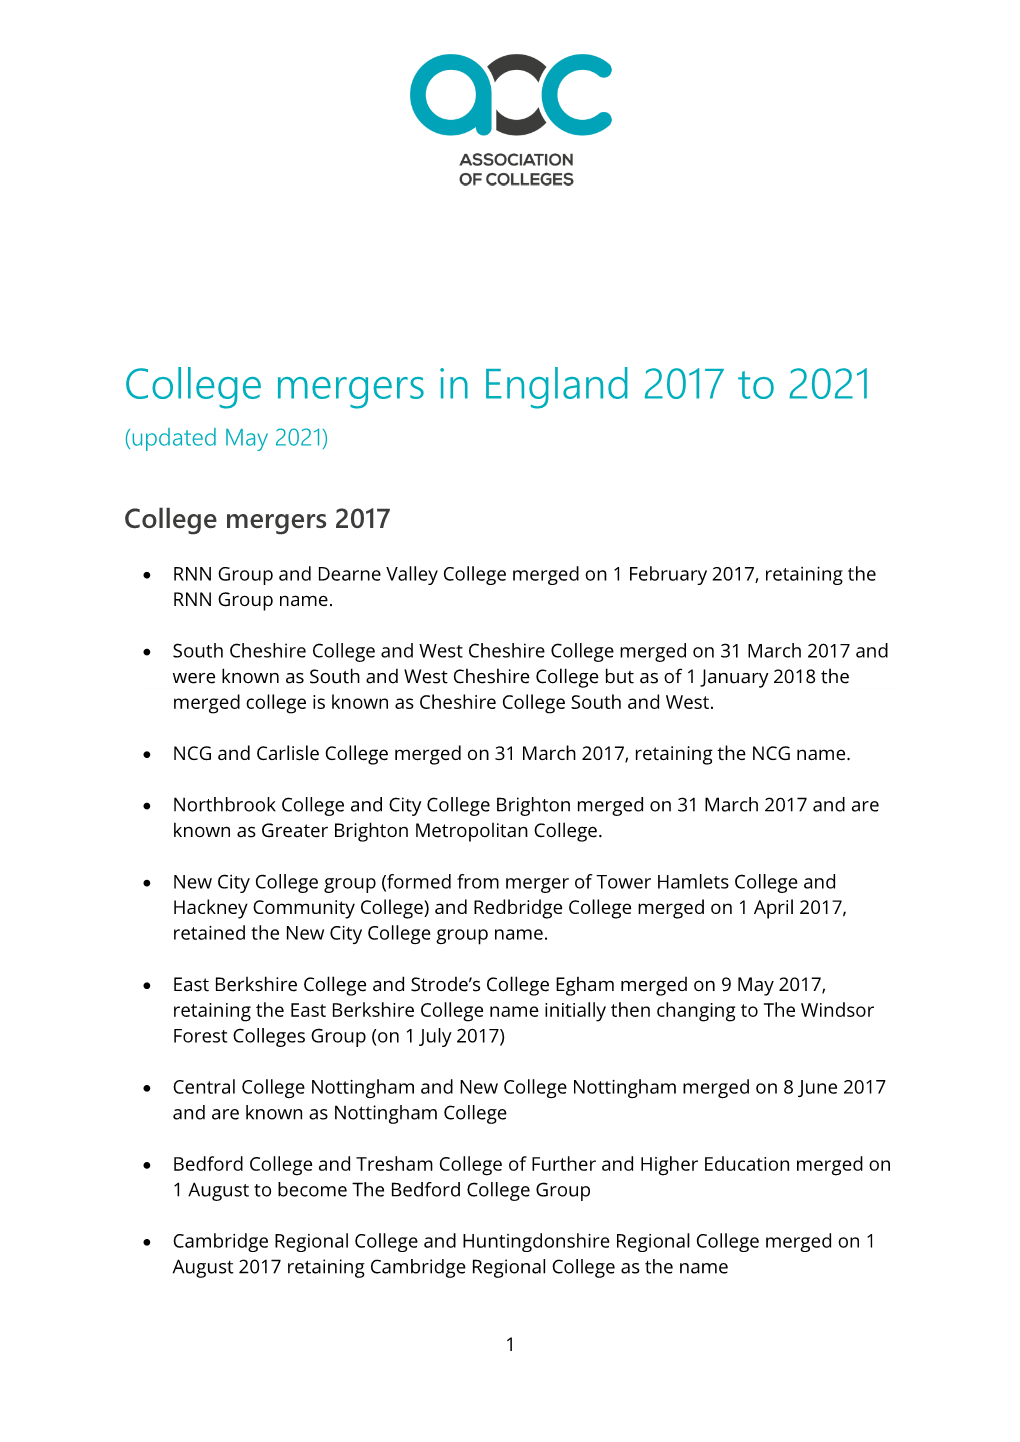 College Mergers in England 2017 to 2021 (Updated May 2021)